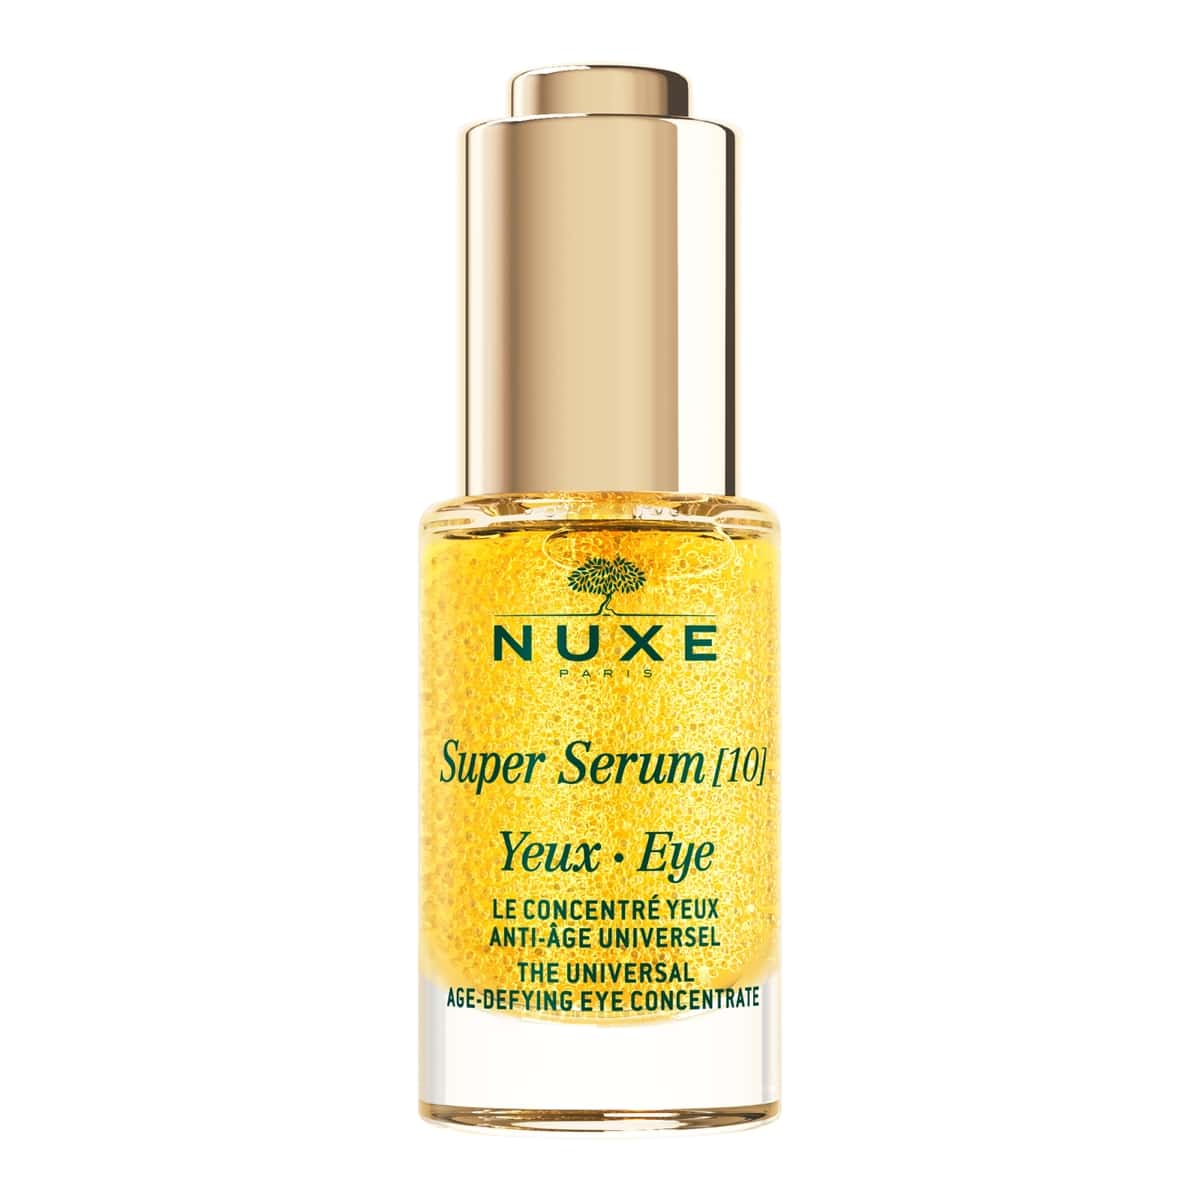 NUXE - Super Serum Eye Concentrate